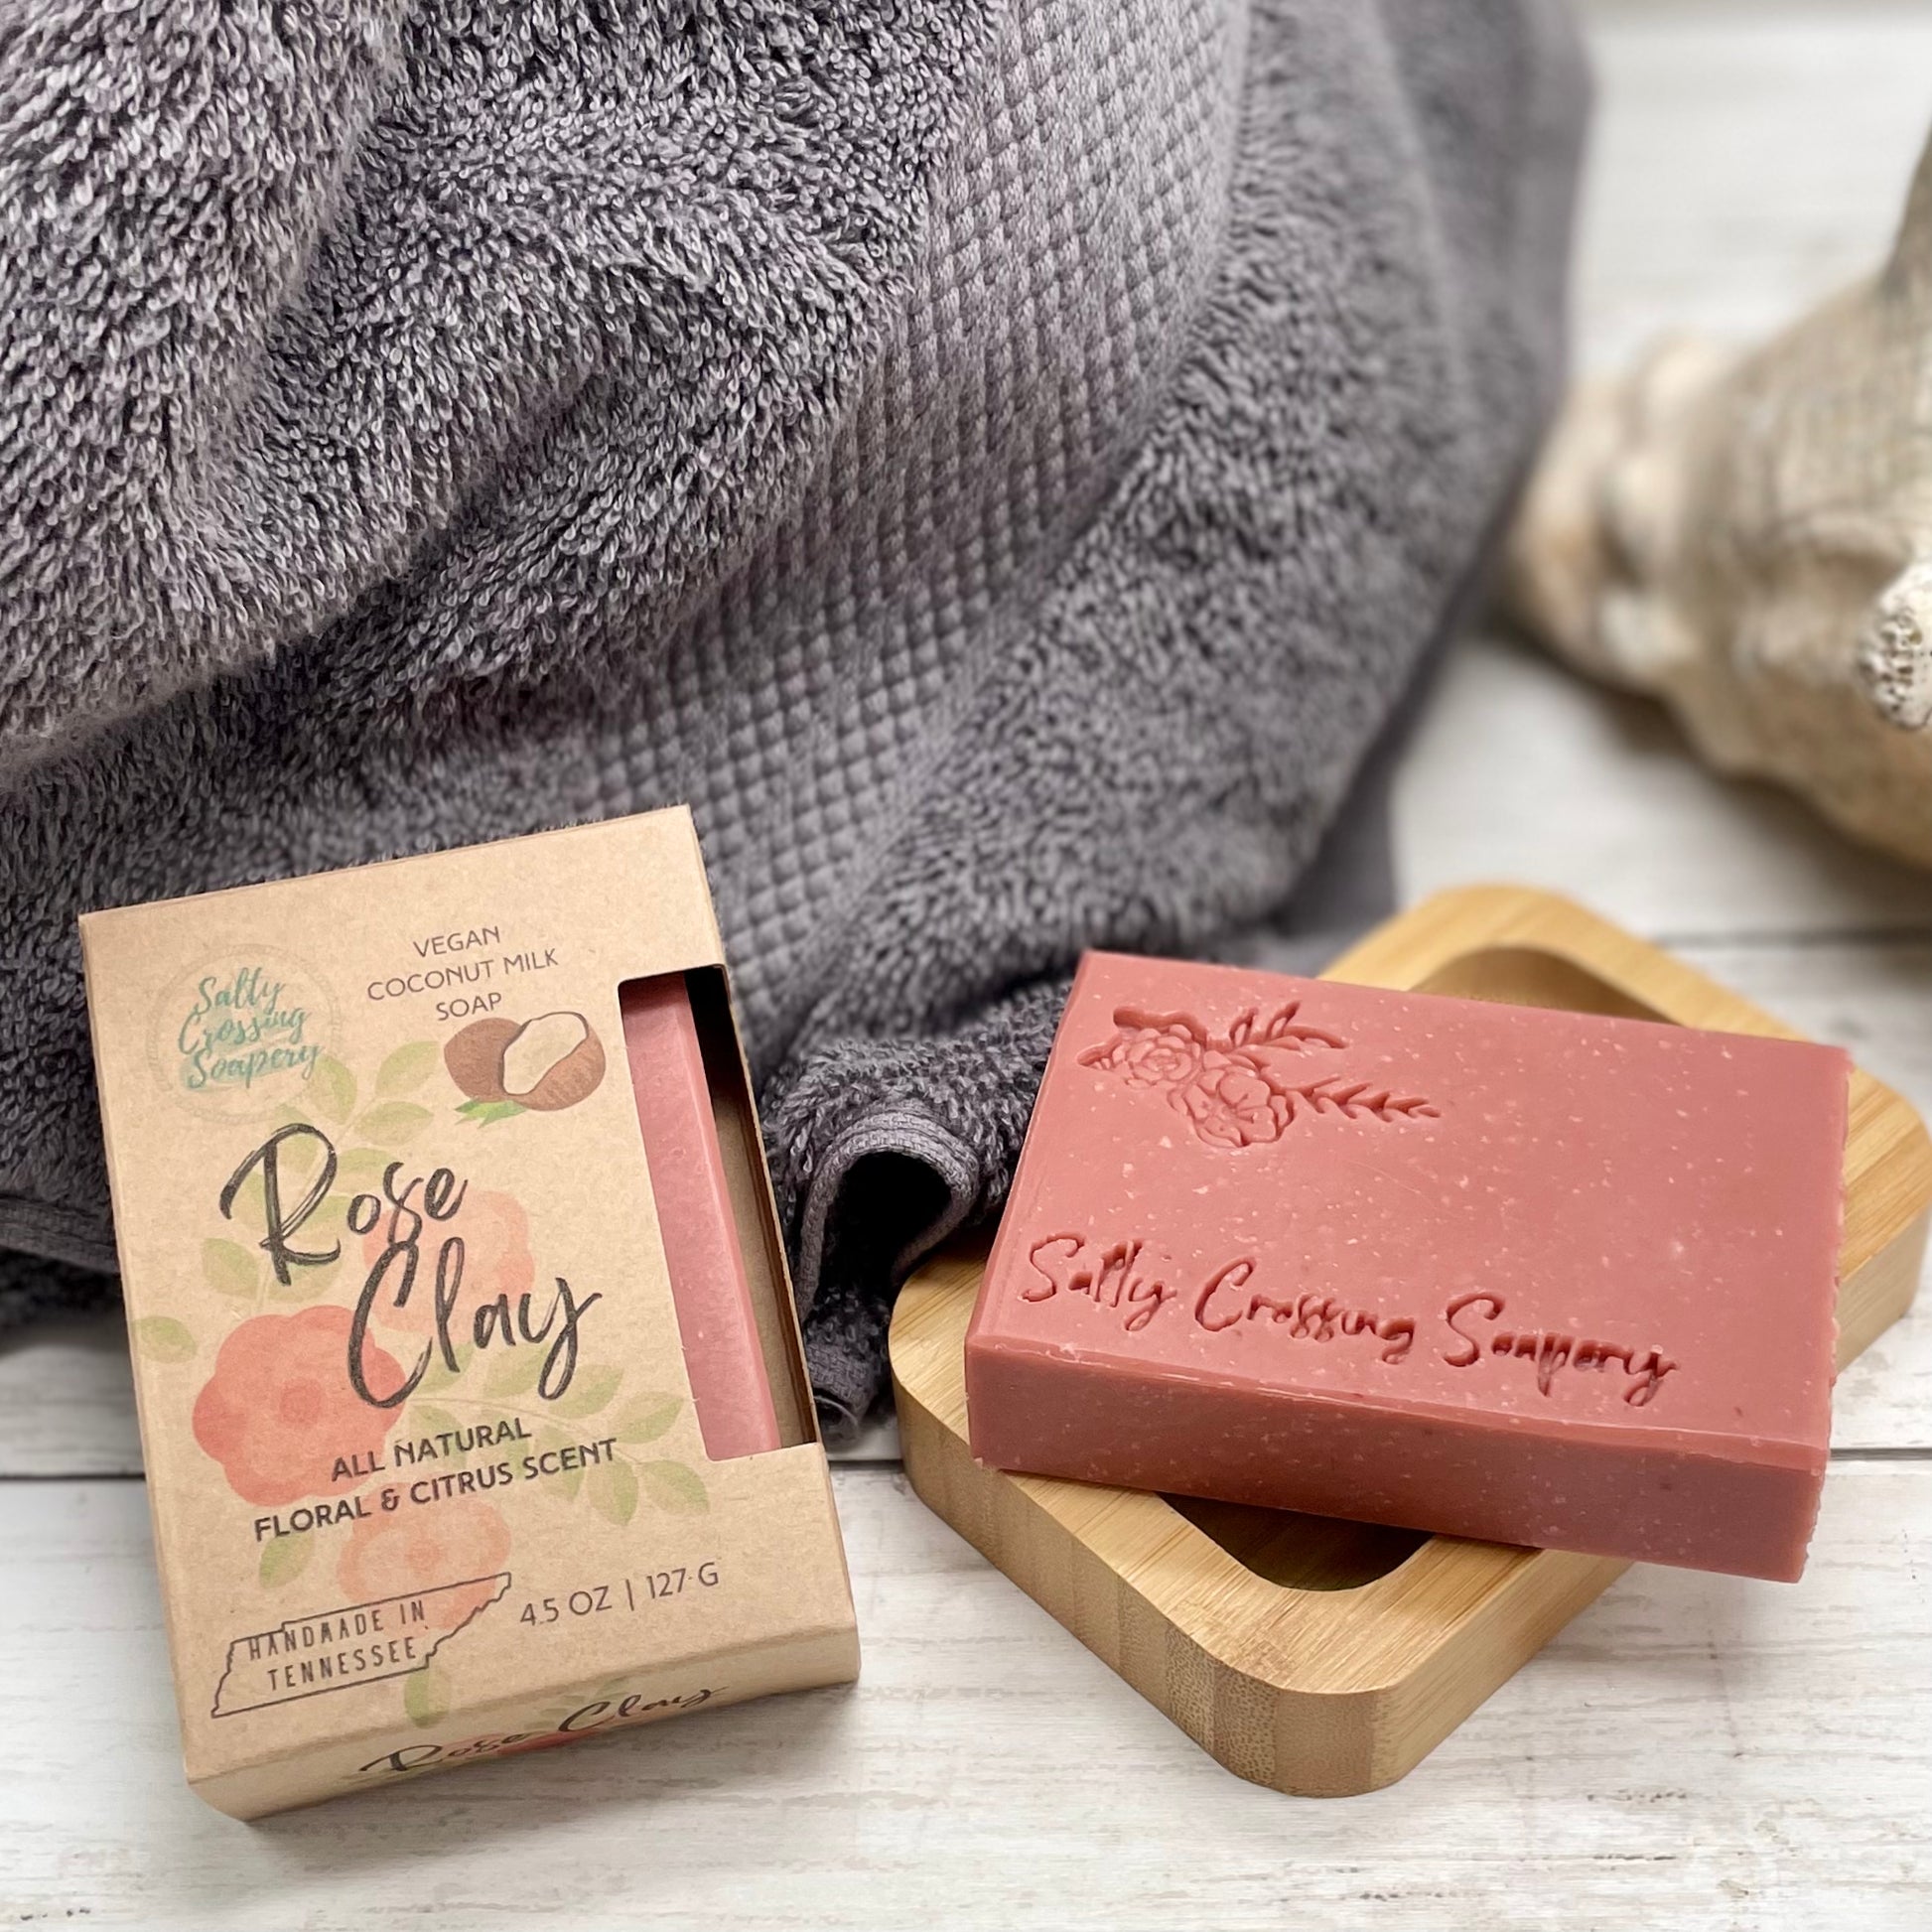 Rose Clay soap bar with box